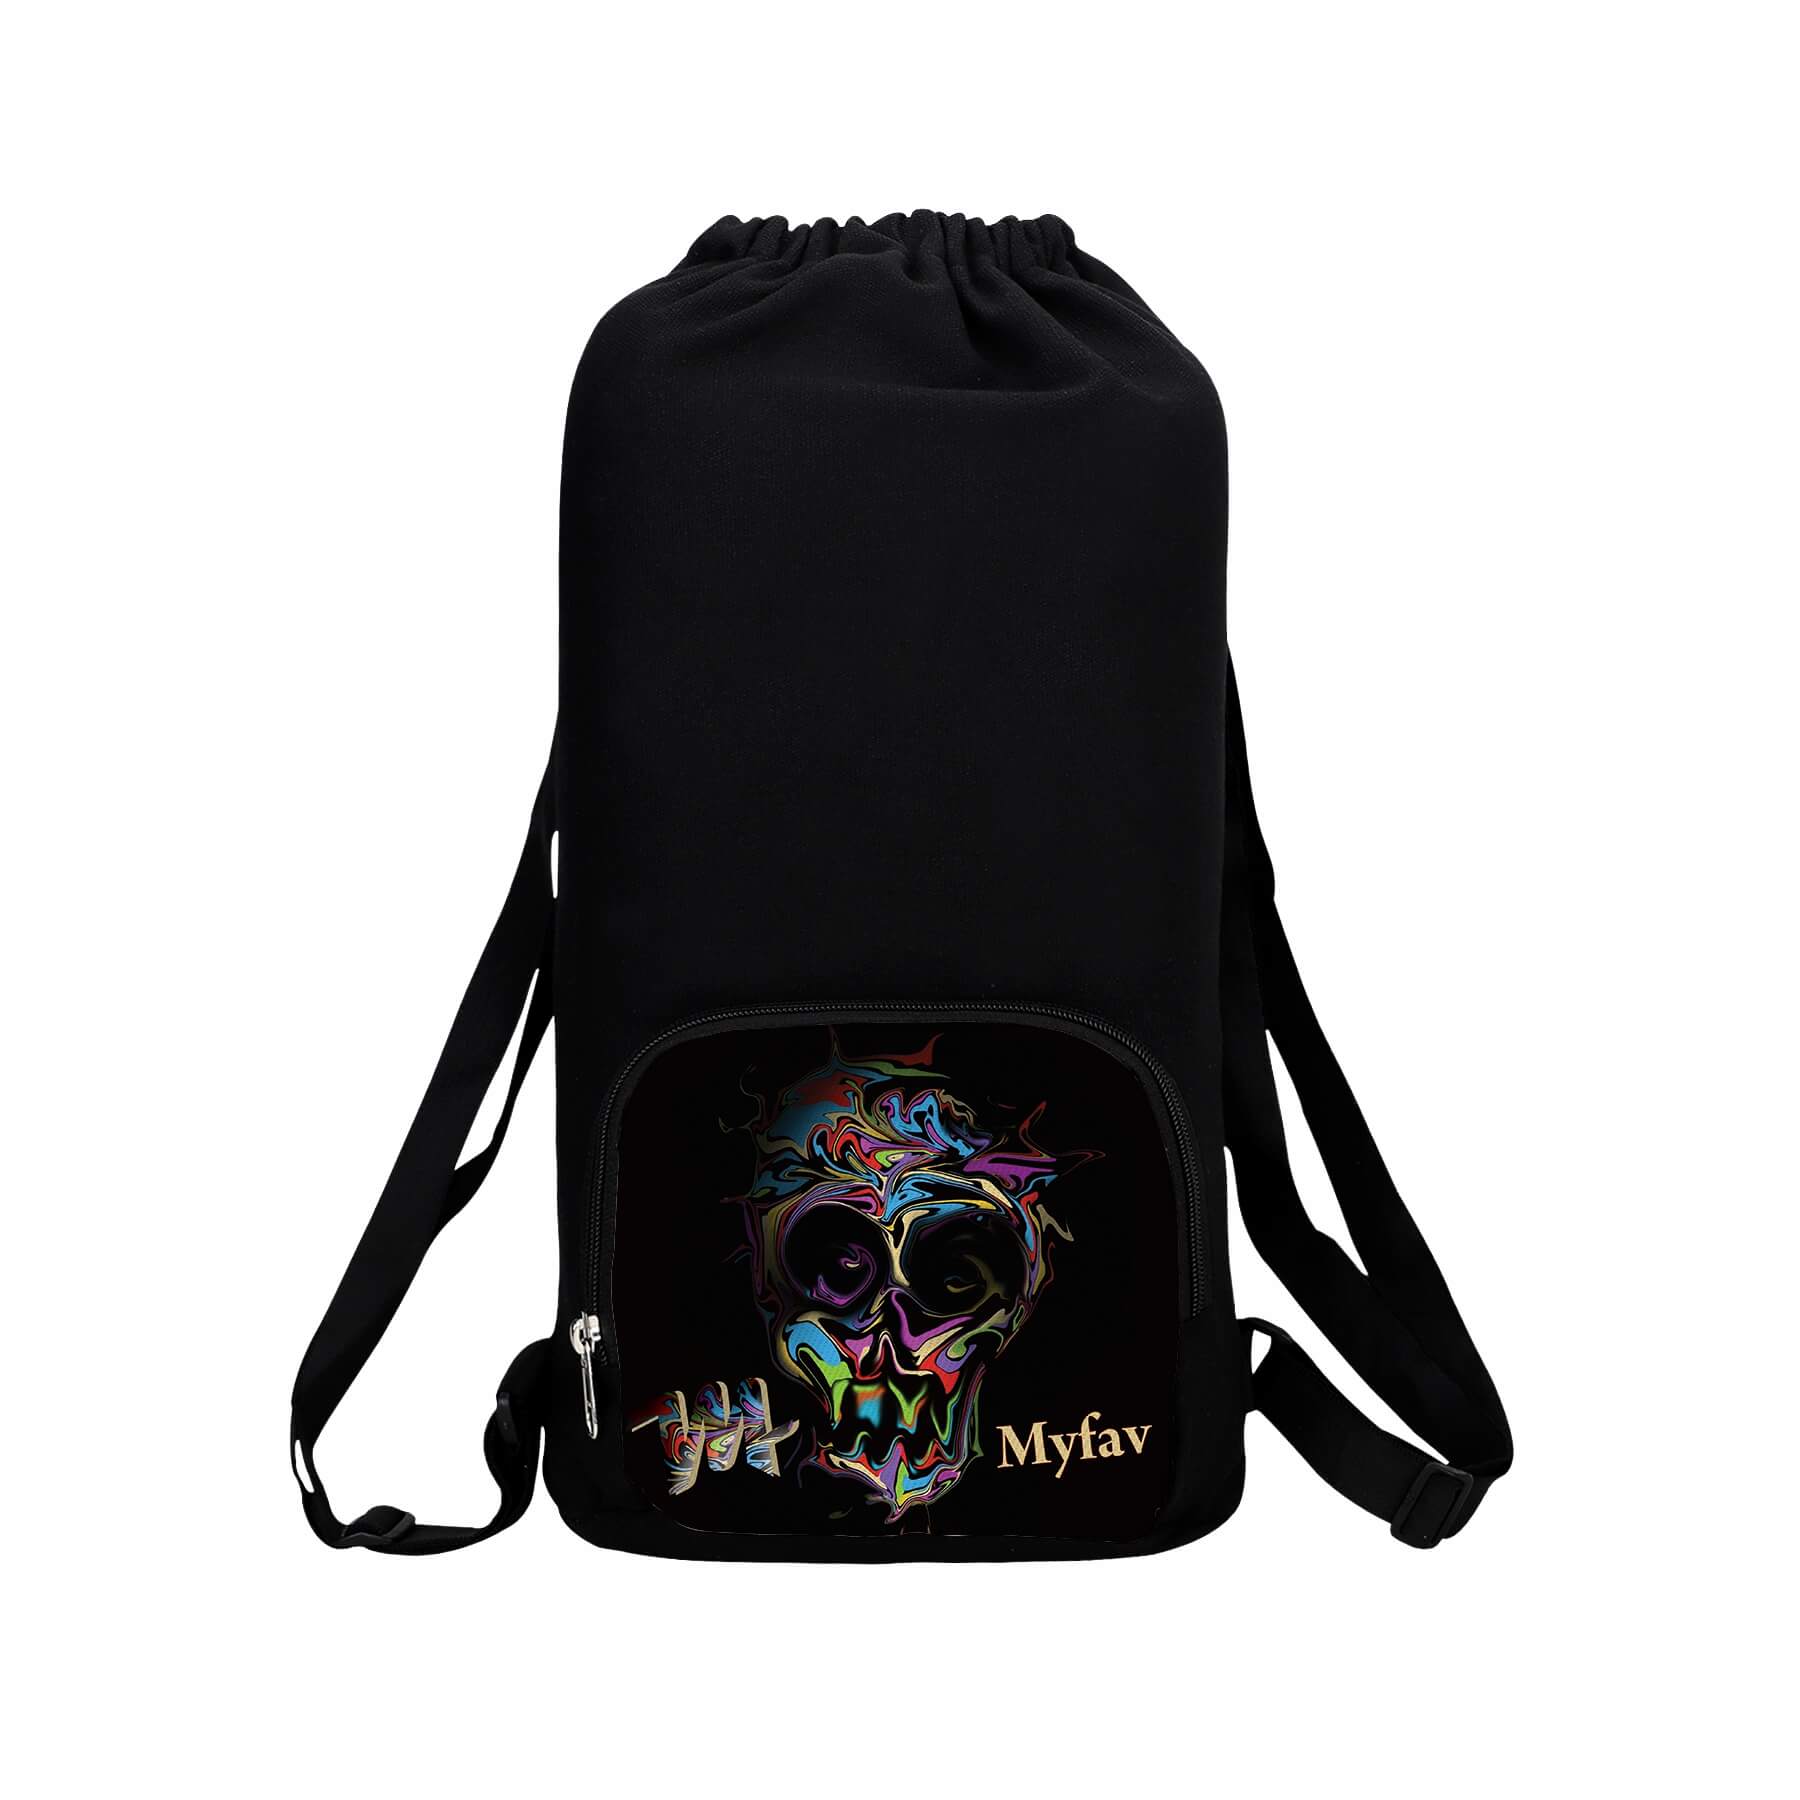 Institute backpack for promotion